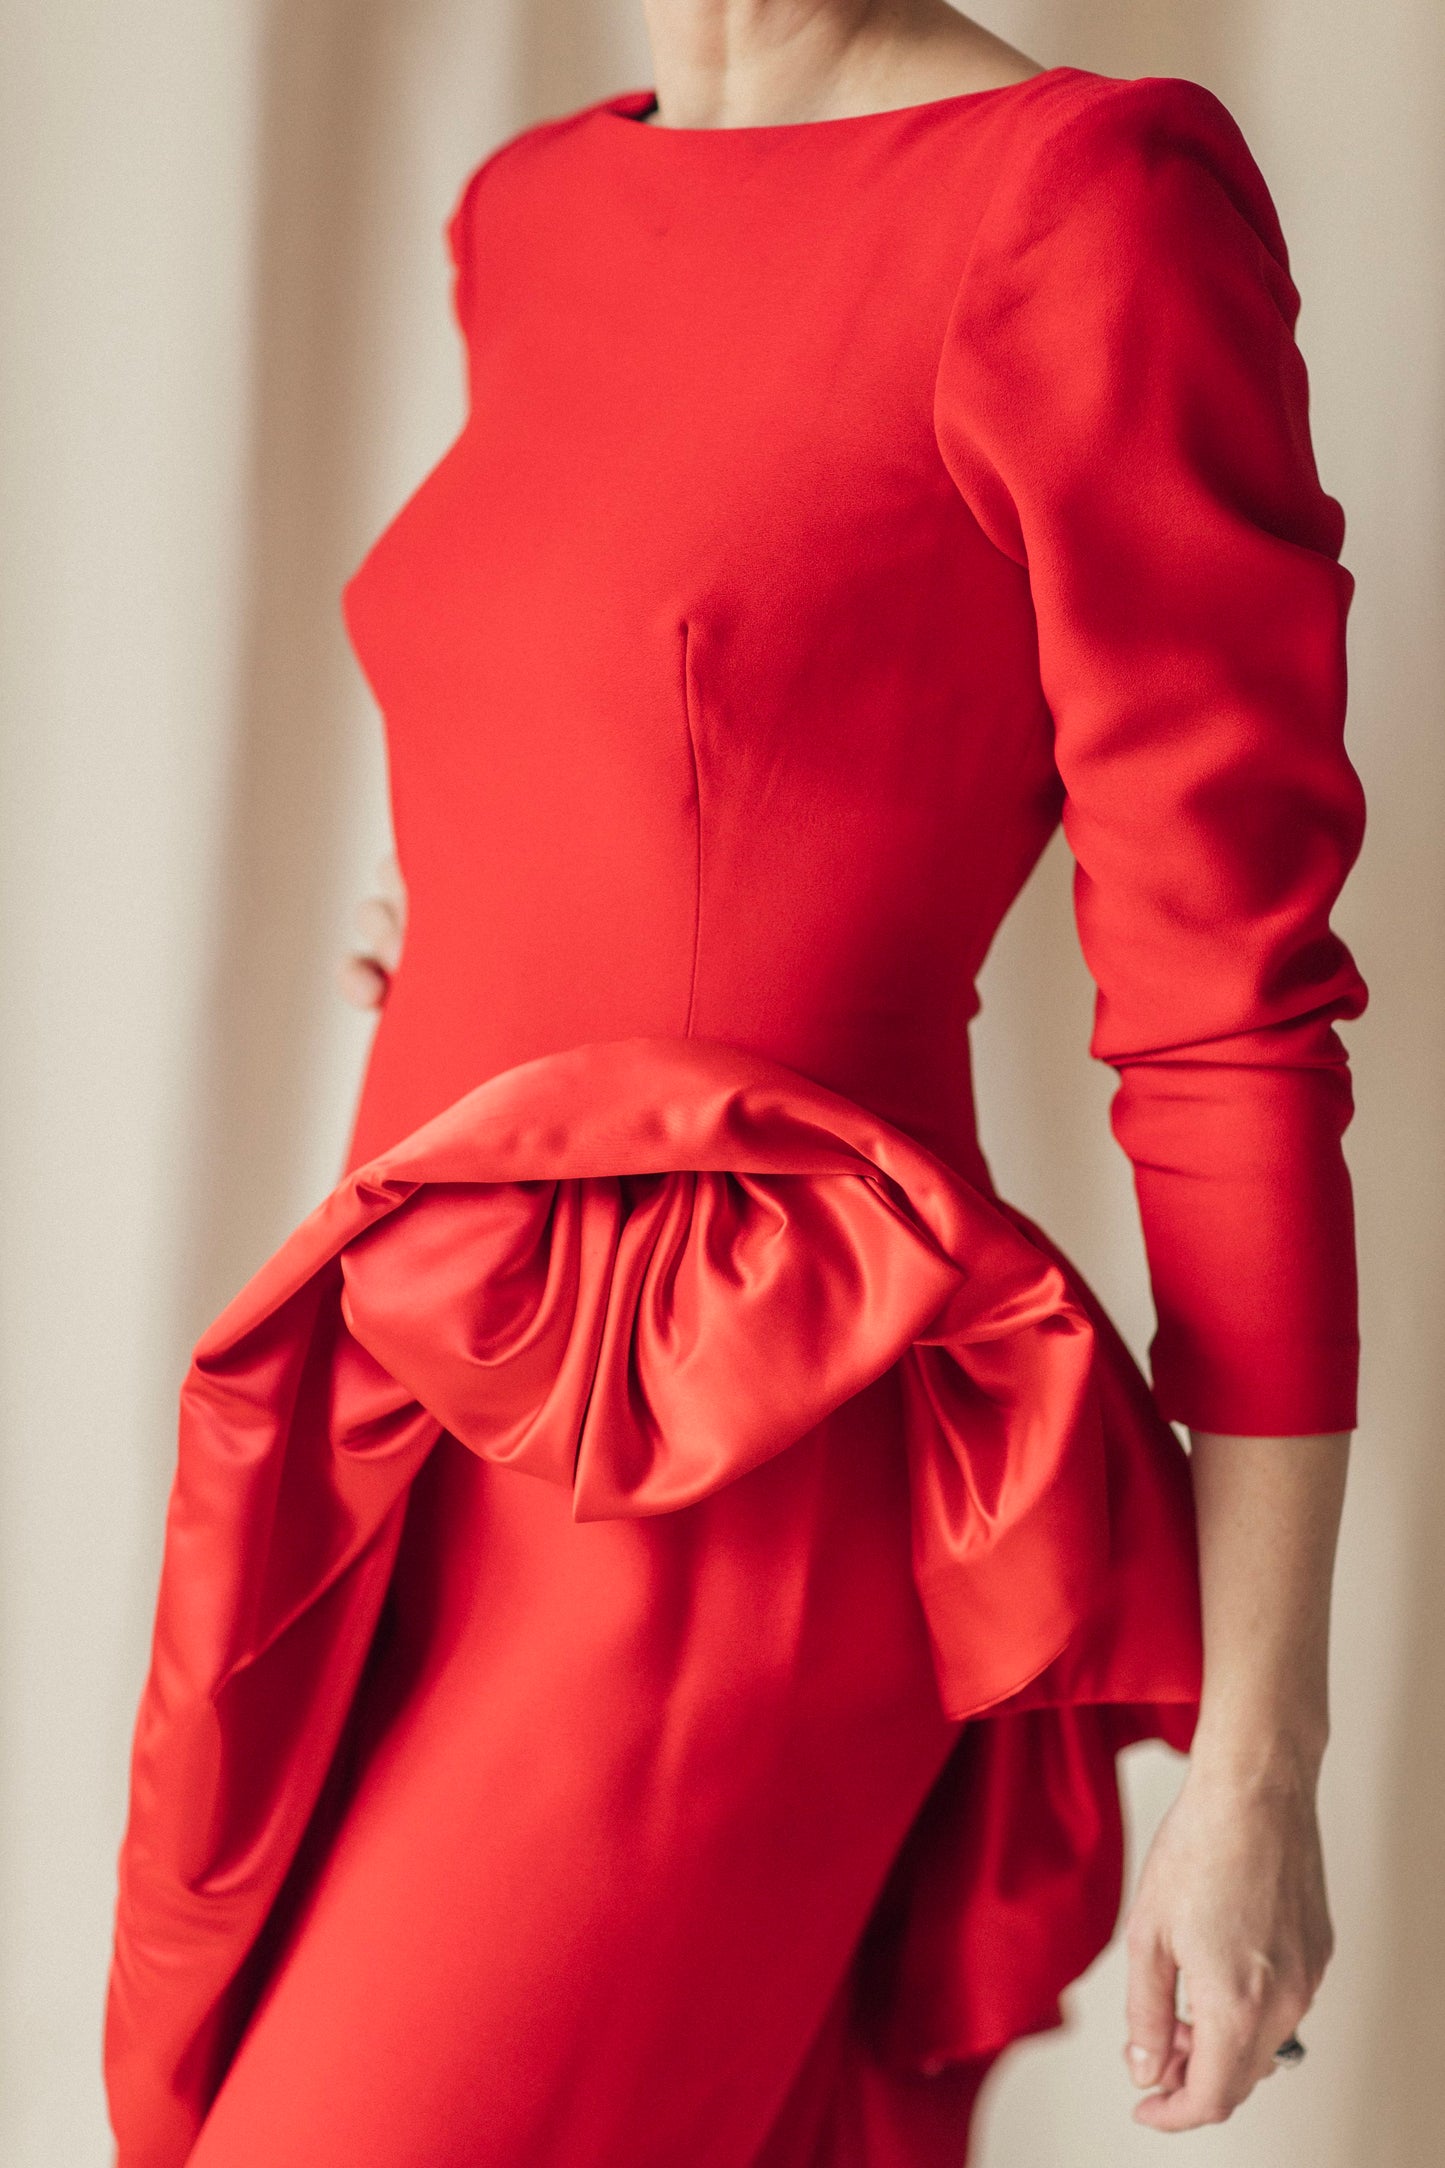 Red Red Rose Dress by Morton Myles